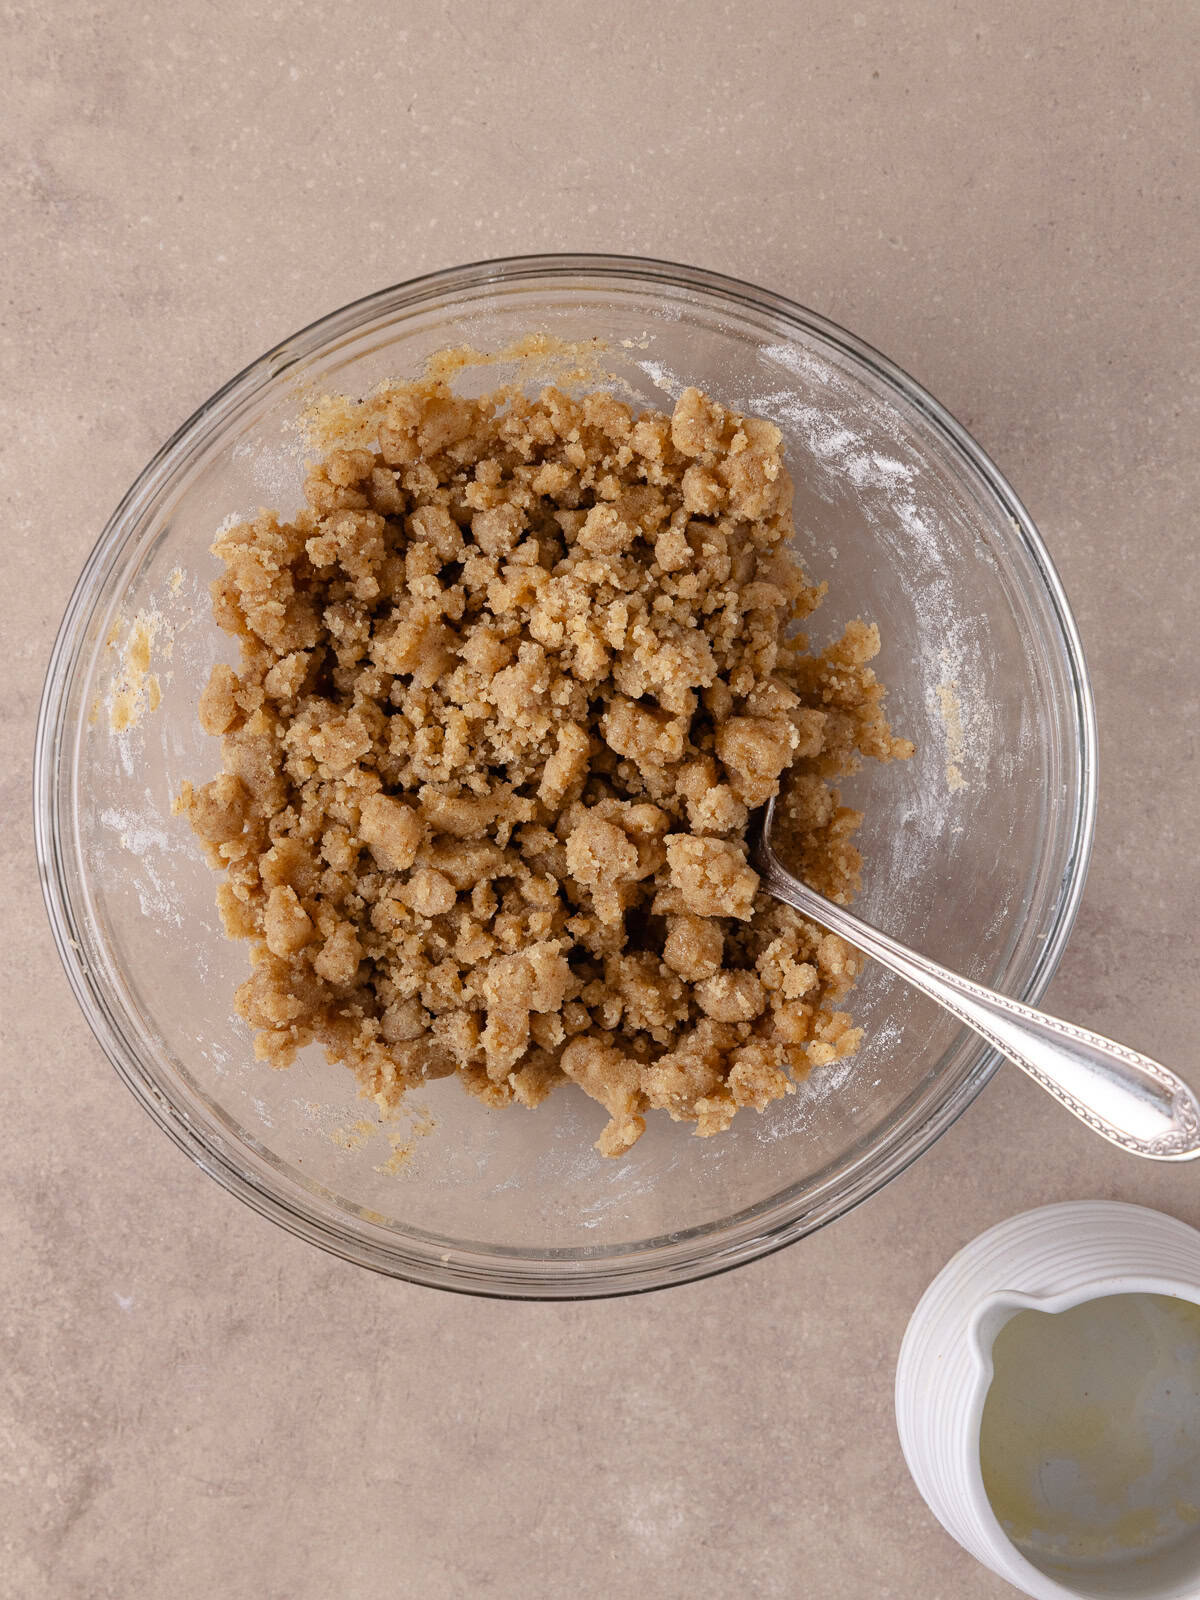 Crumb topping (flour, brown sugar, espresso powder and melted butter) has been mixed together in a small glass bowl.